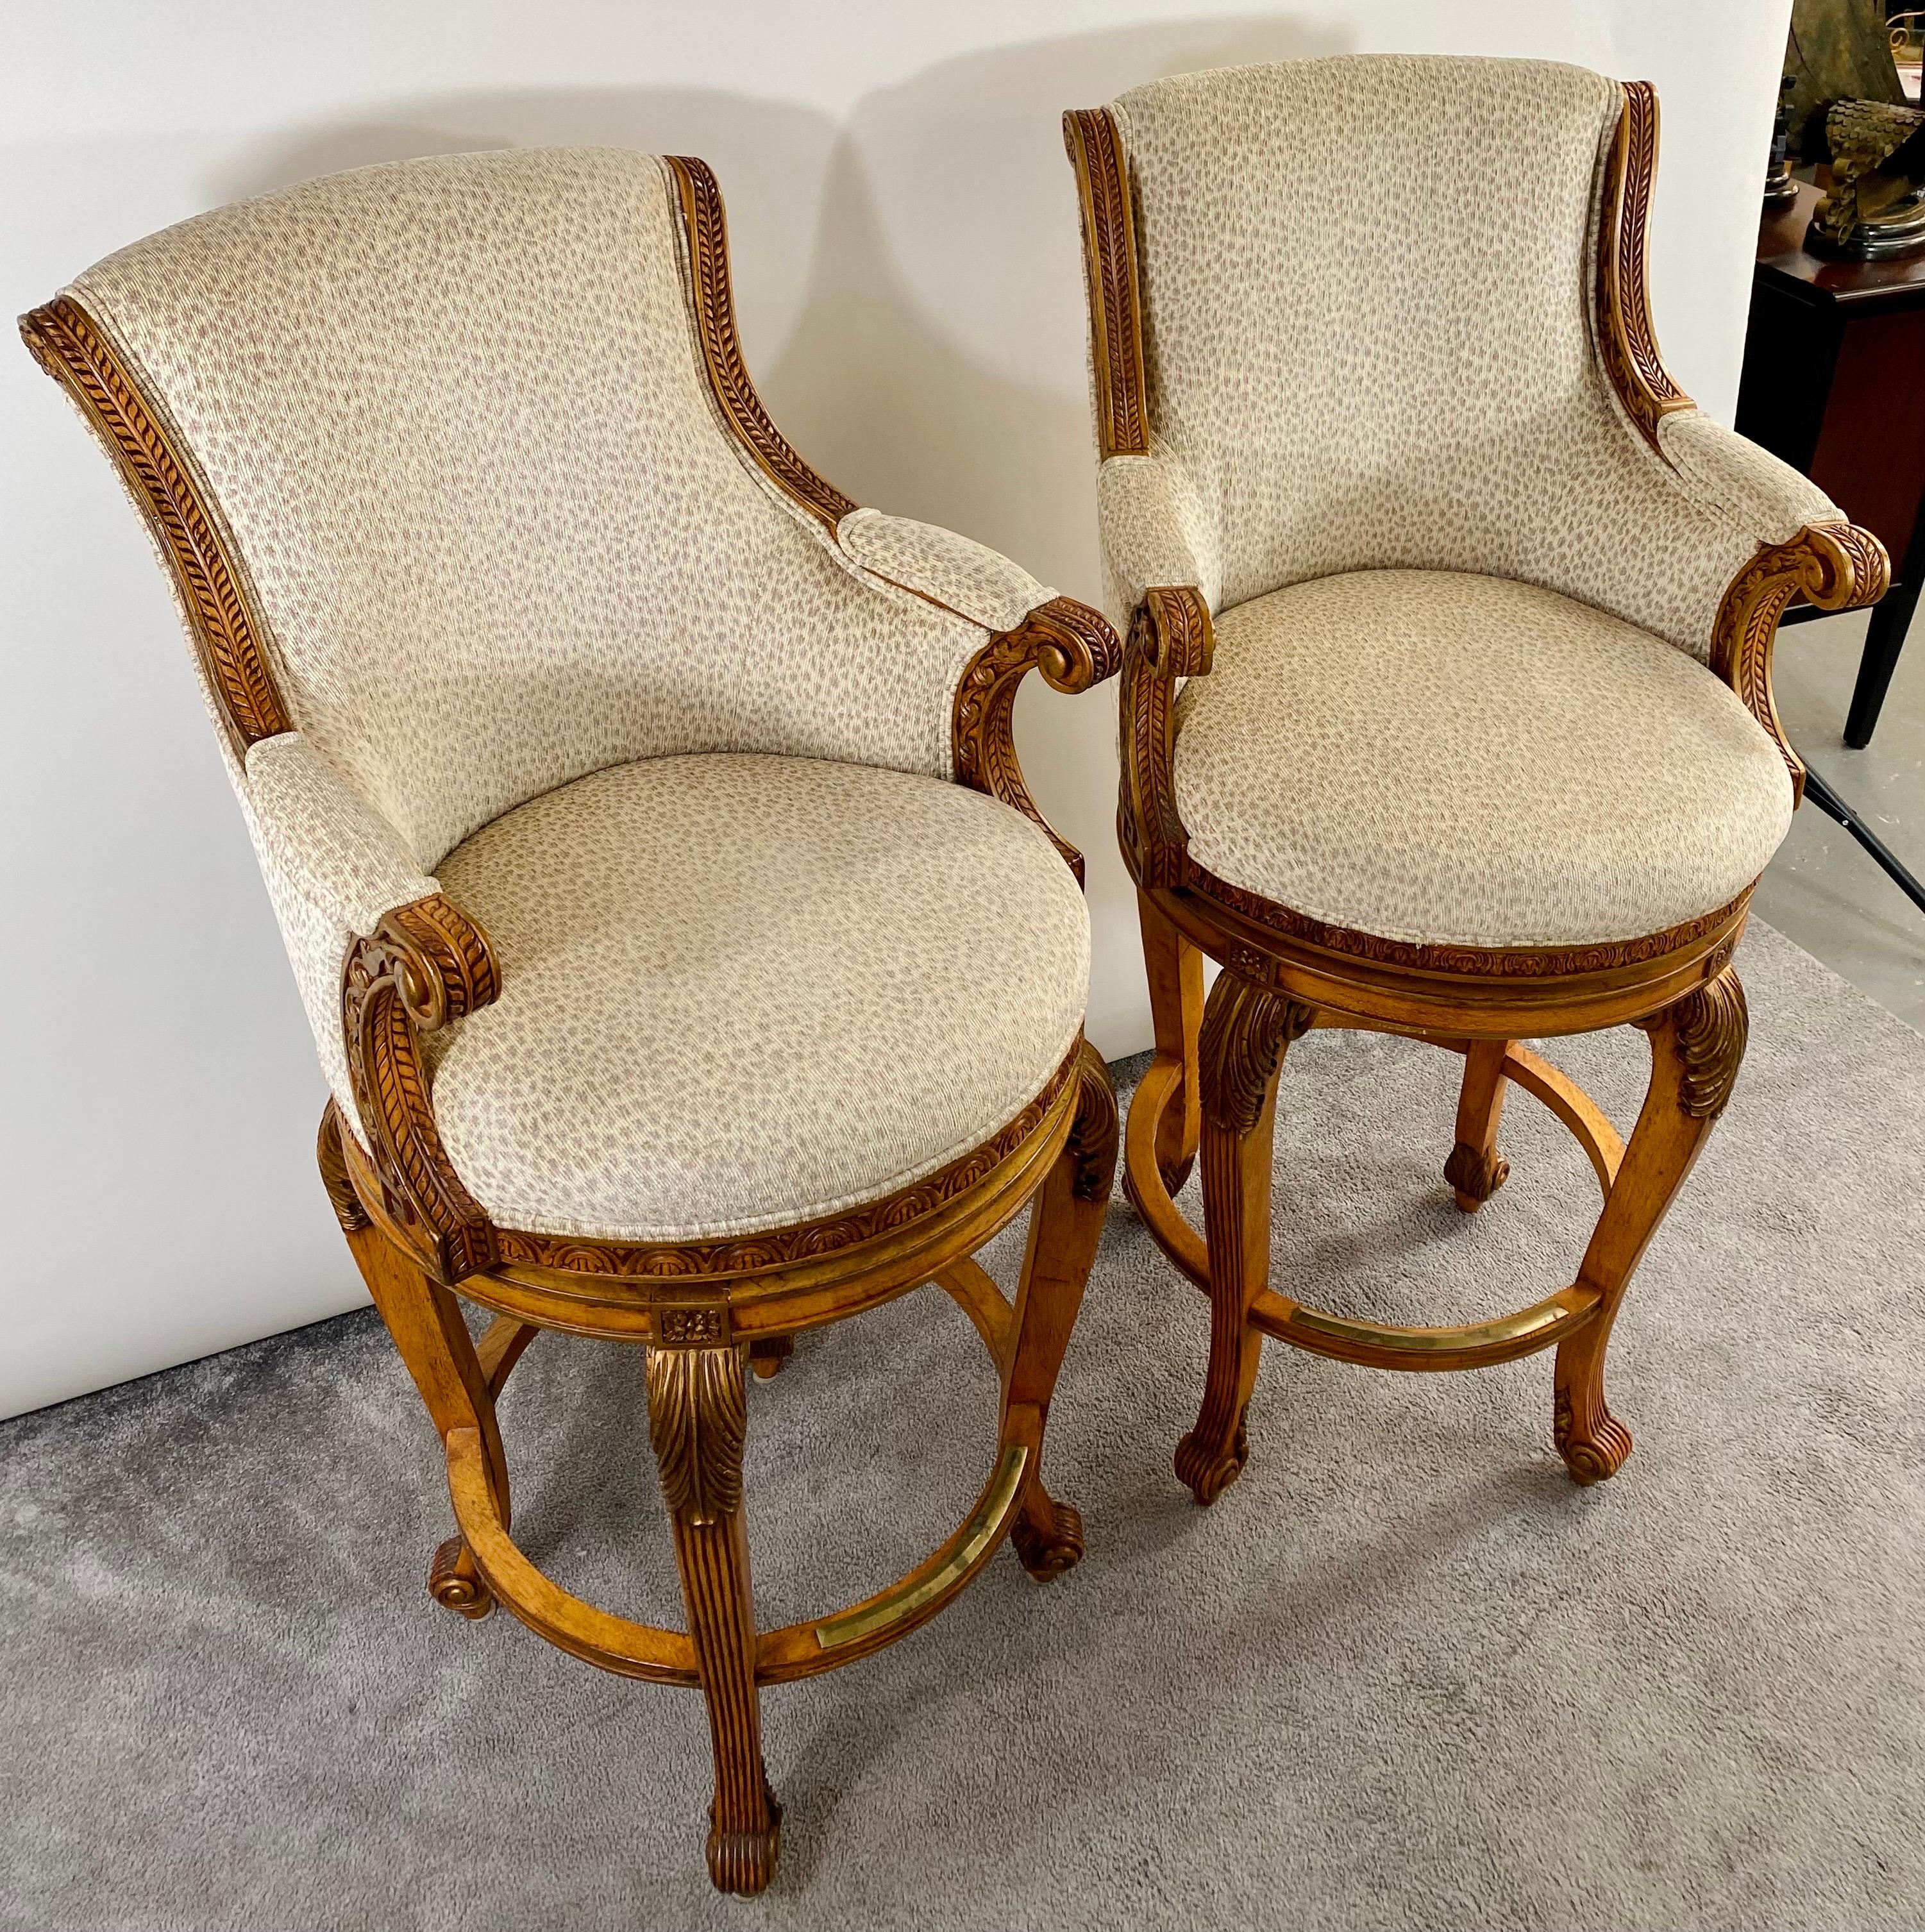 A quality and elegant  pair of hand-carved Italian provincial / regency style bar stools made by the fine furniture maker and designer Ferguson Copeland Ltd from North Carolina.  Each stool is finely carved and shows beautiful scroll and geometrical